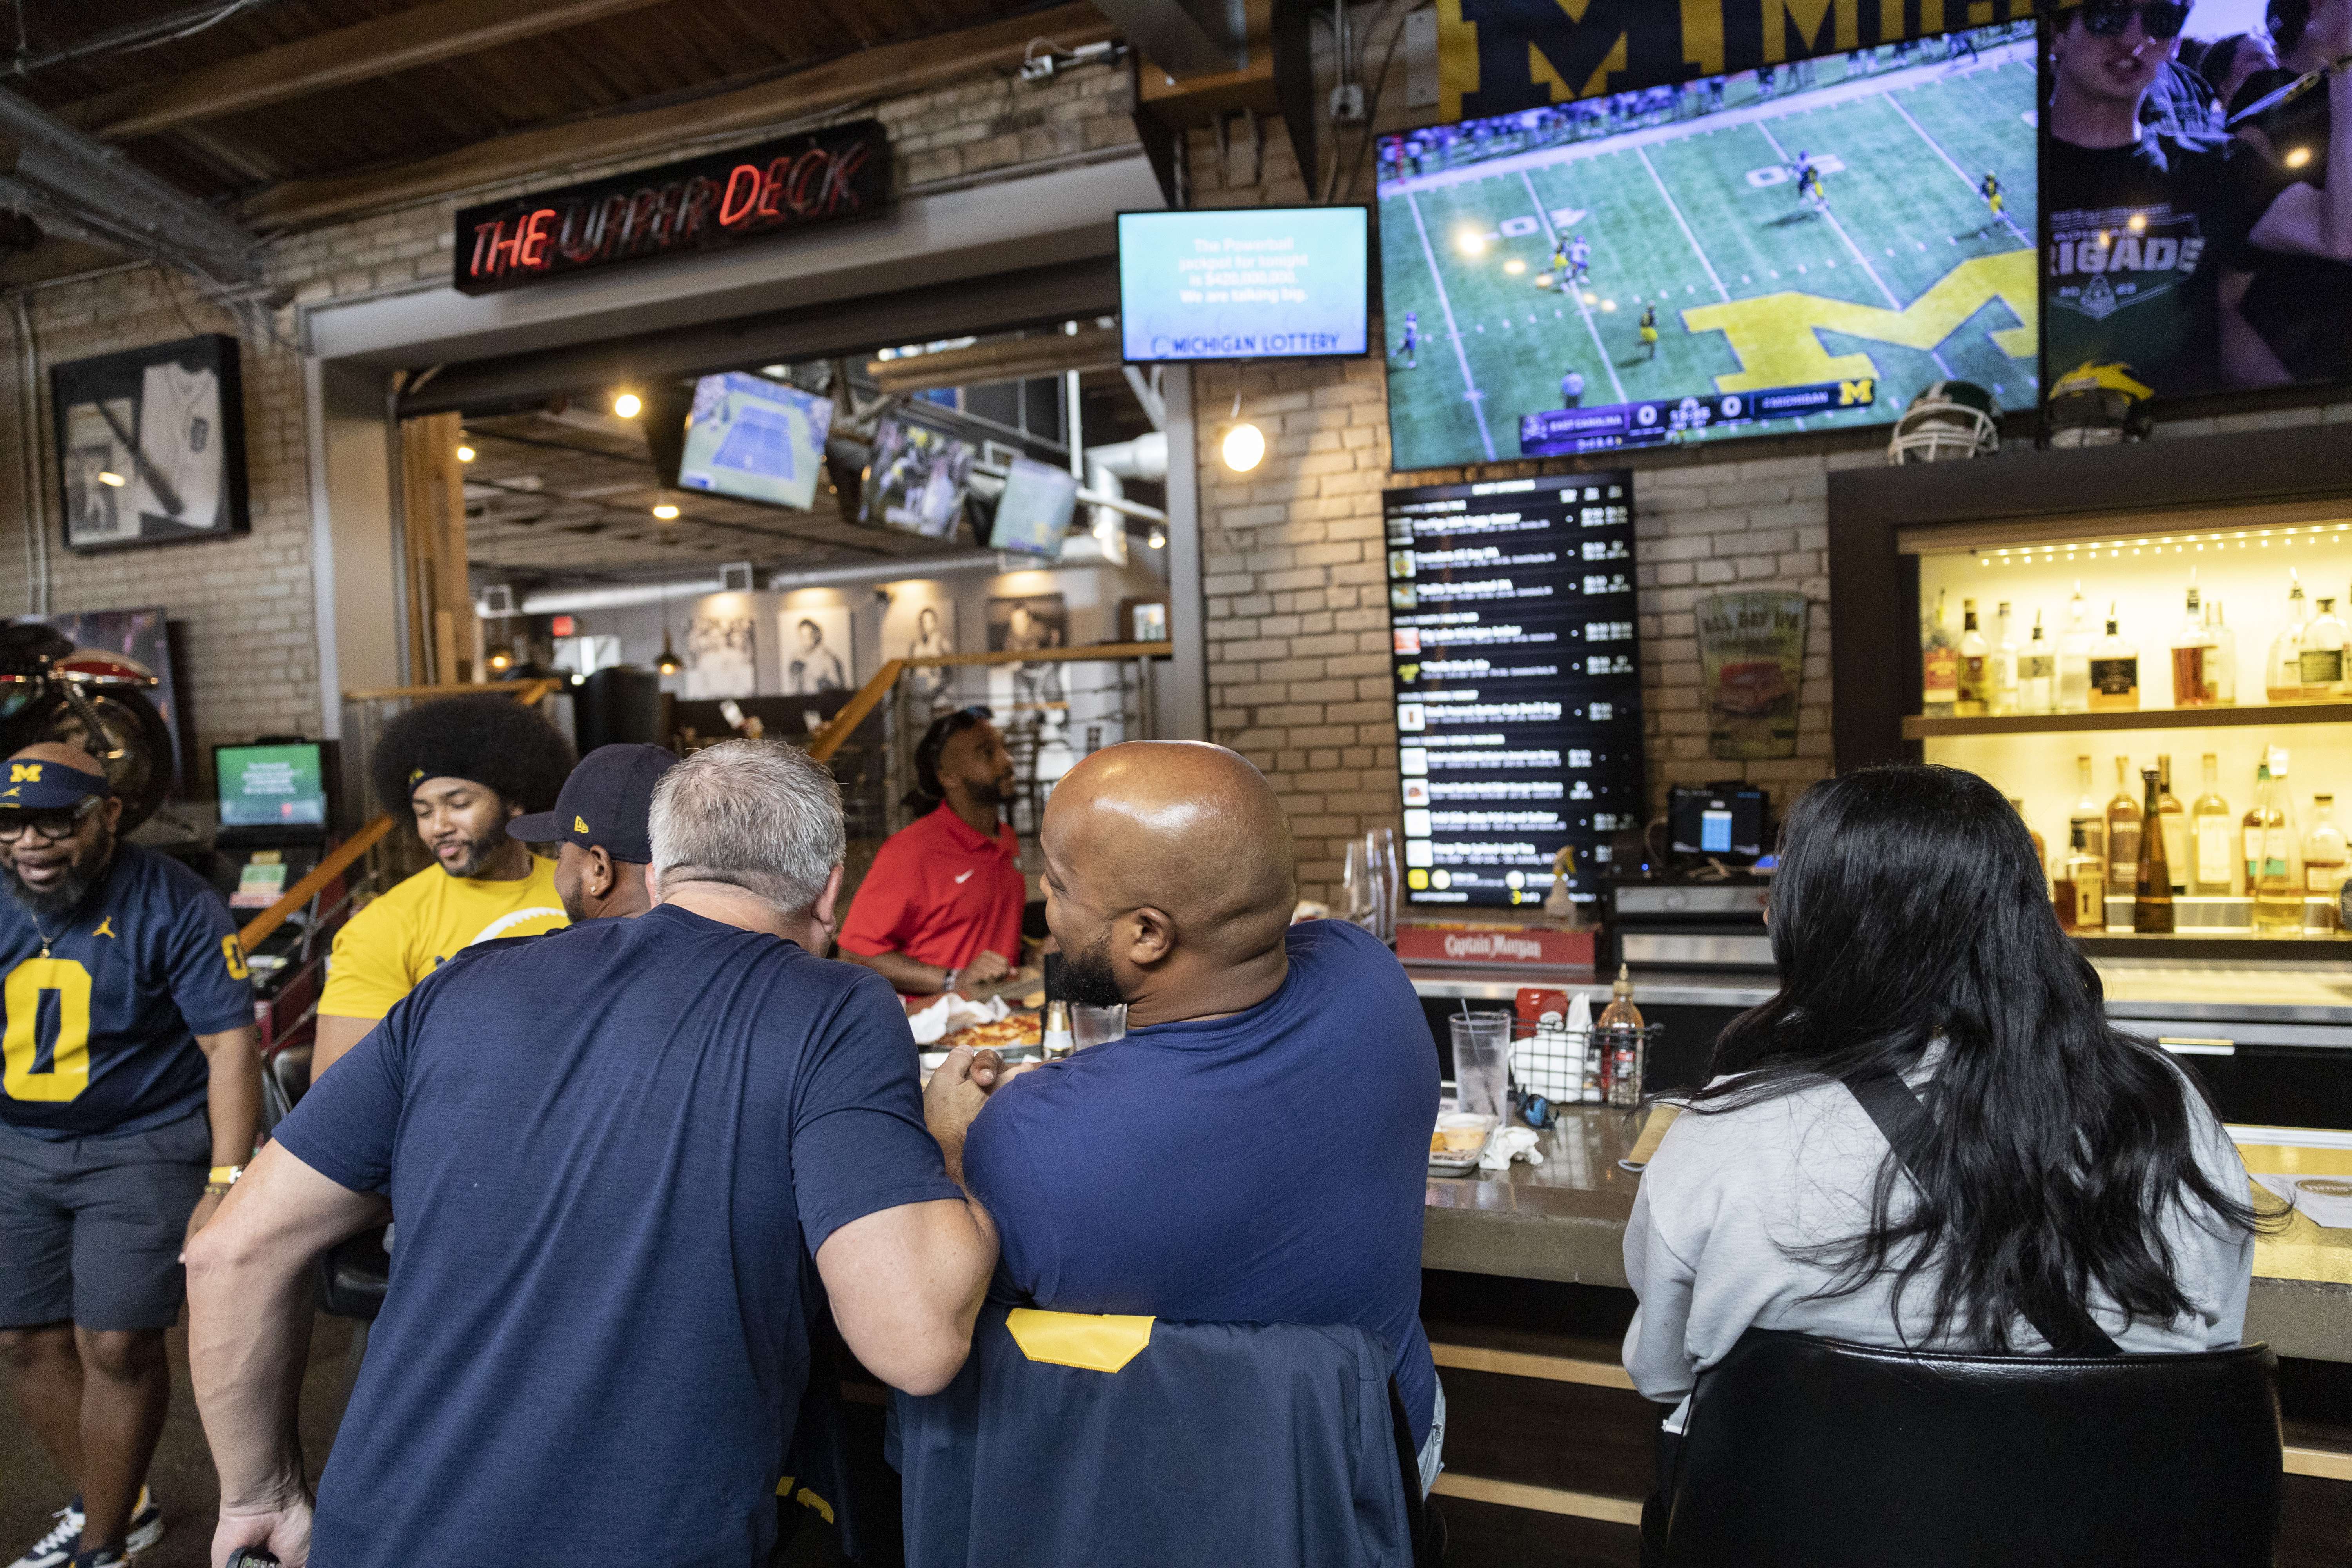 Top Sports Bars in the Grand Rapids Area to Catch a Game